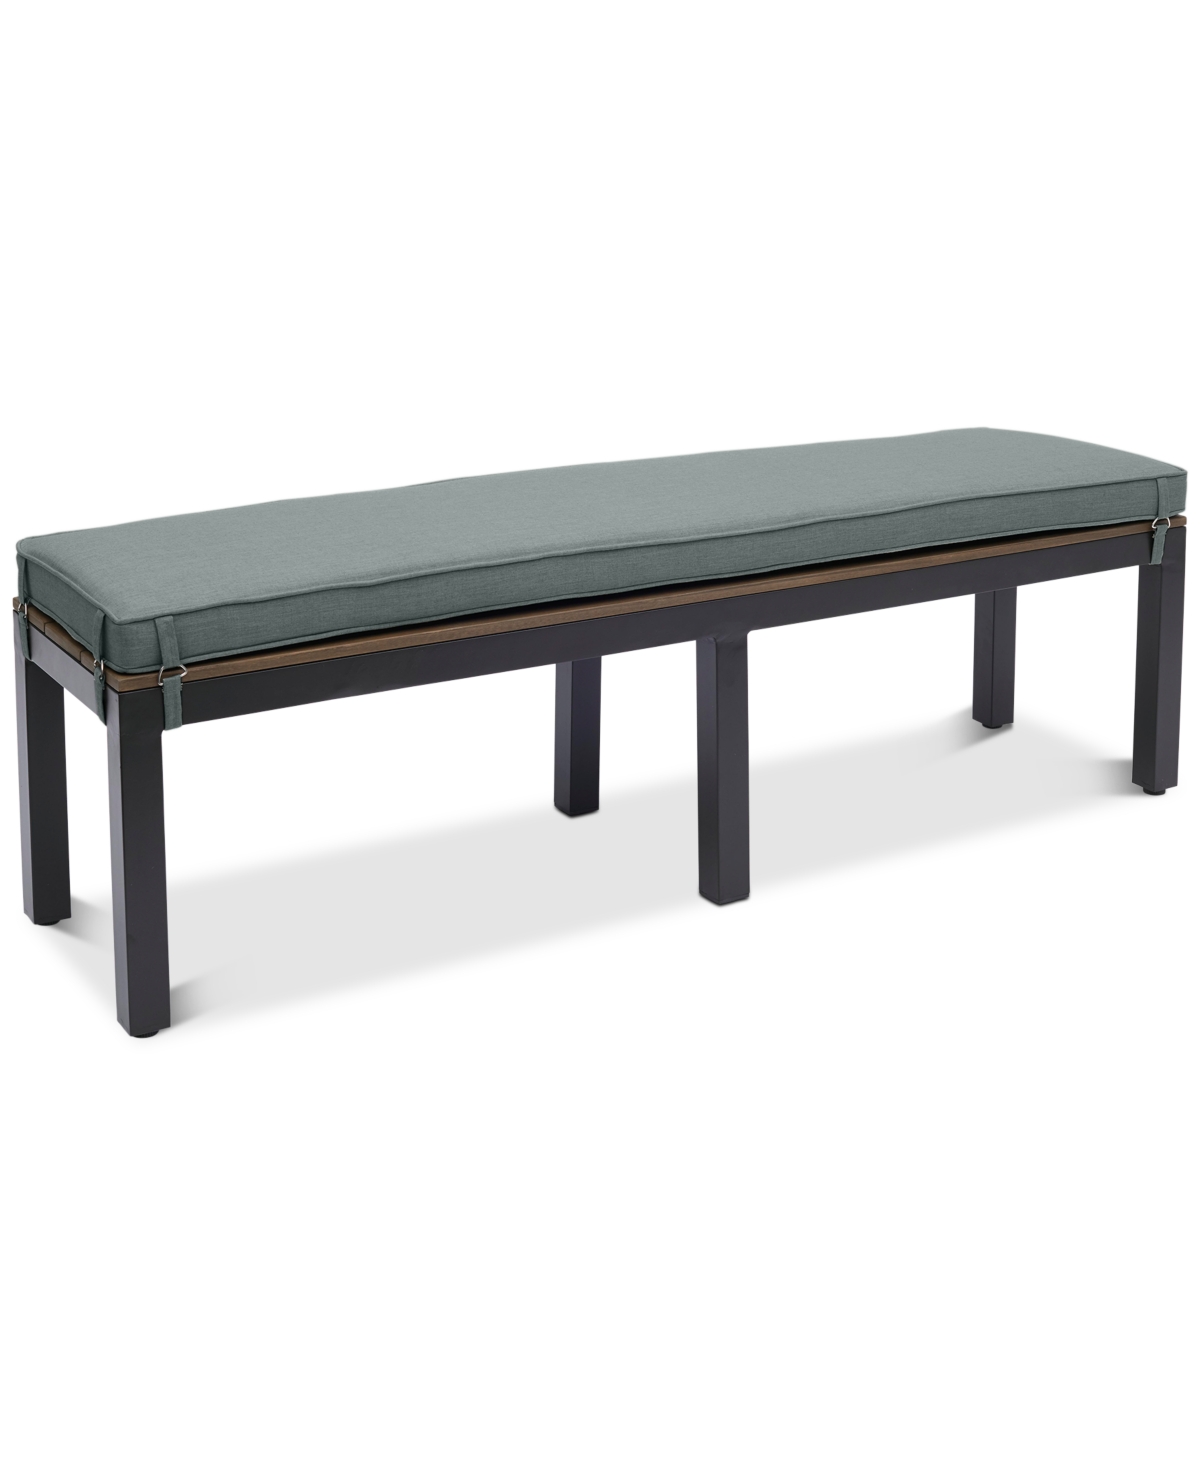 10397498 Stockholm Outdoor Bench with Outdoor Cushion, Crea sku 10397498